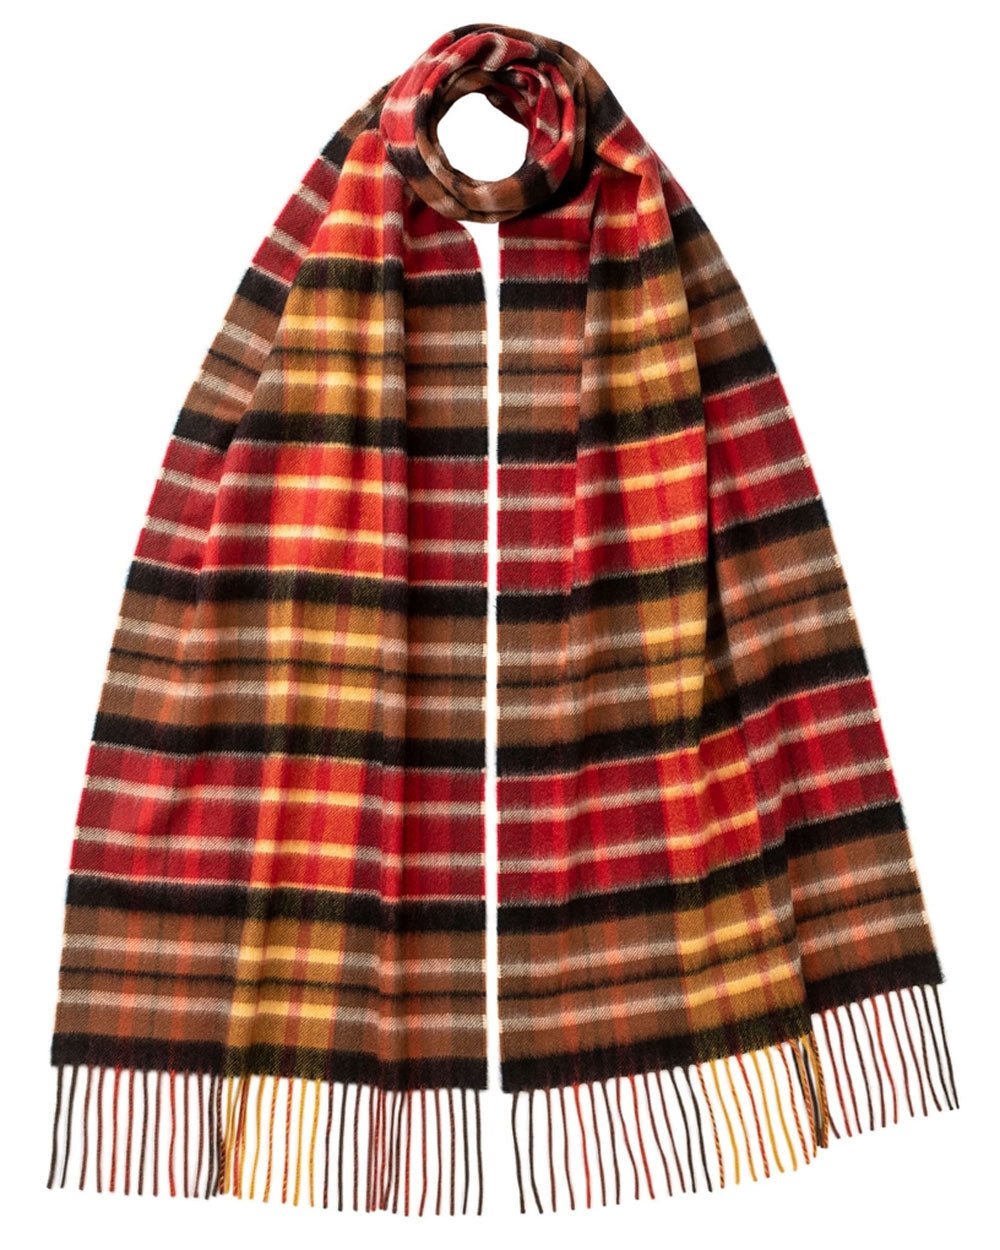 Cashmere Check Wide Scarf in Sunlit